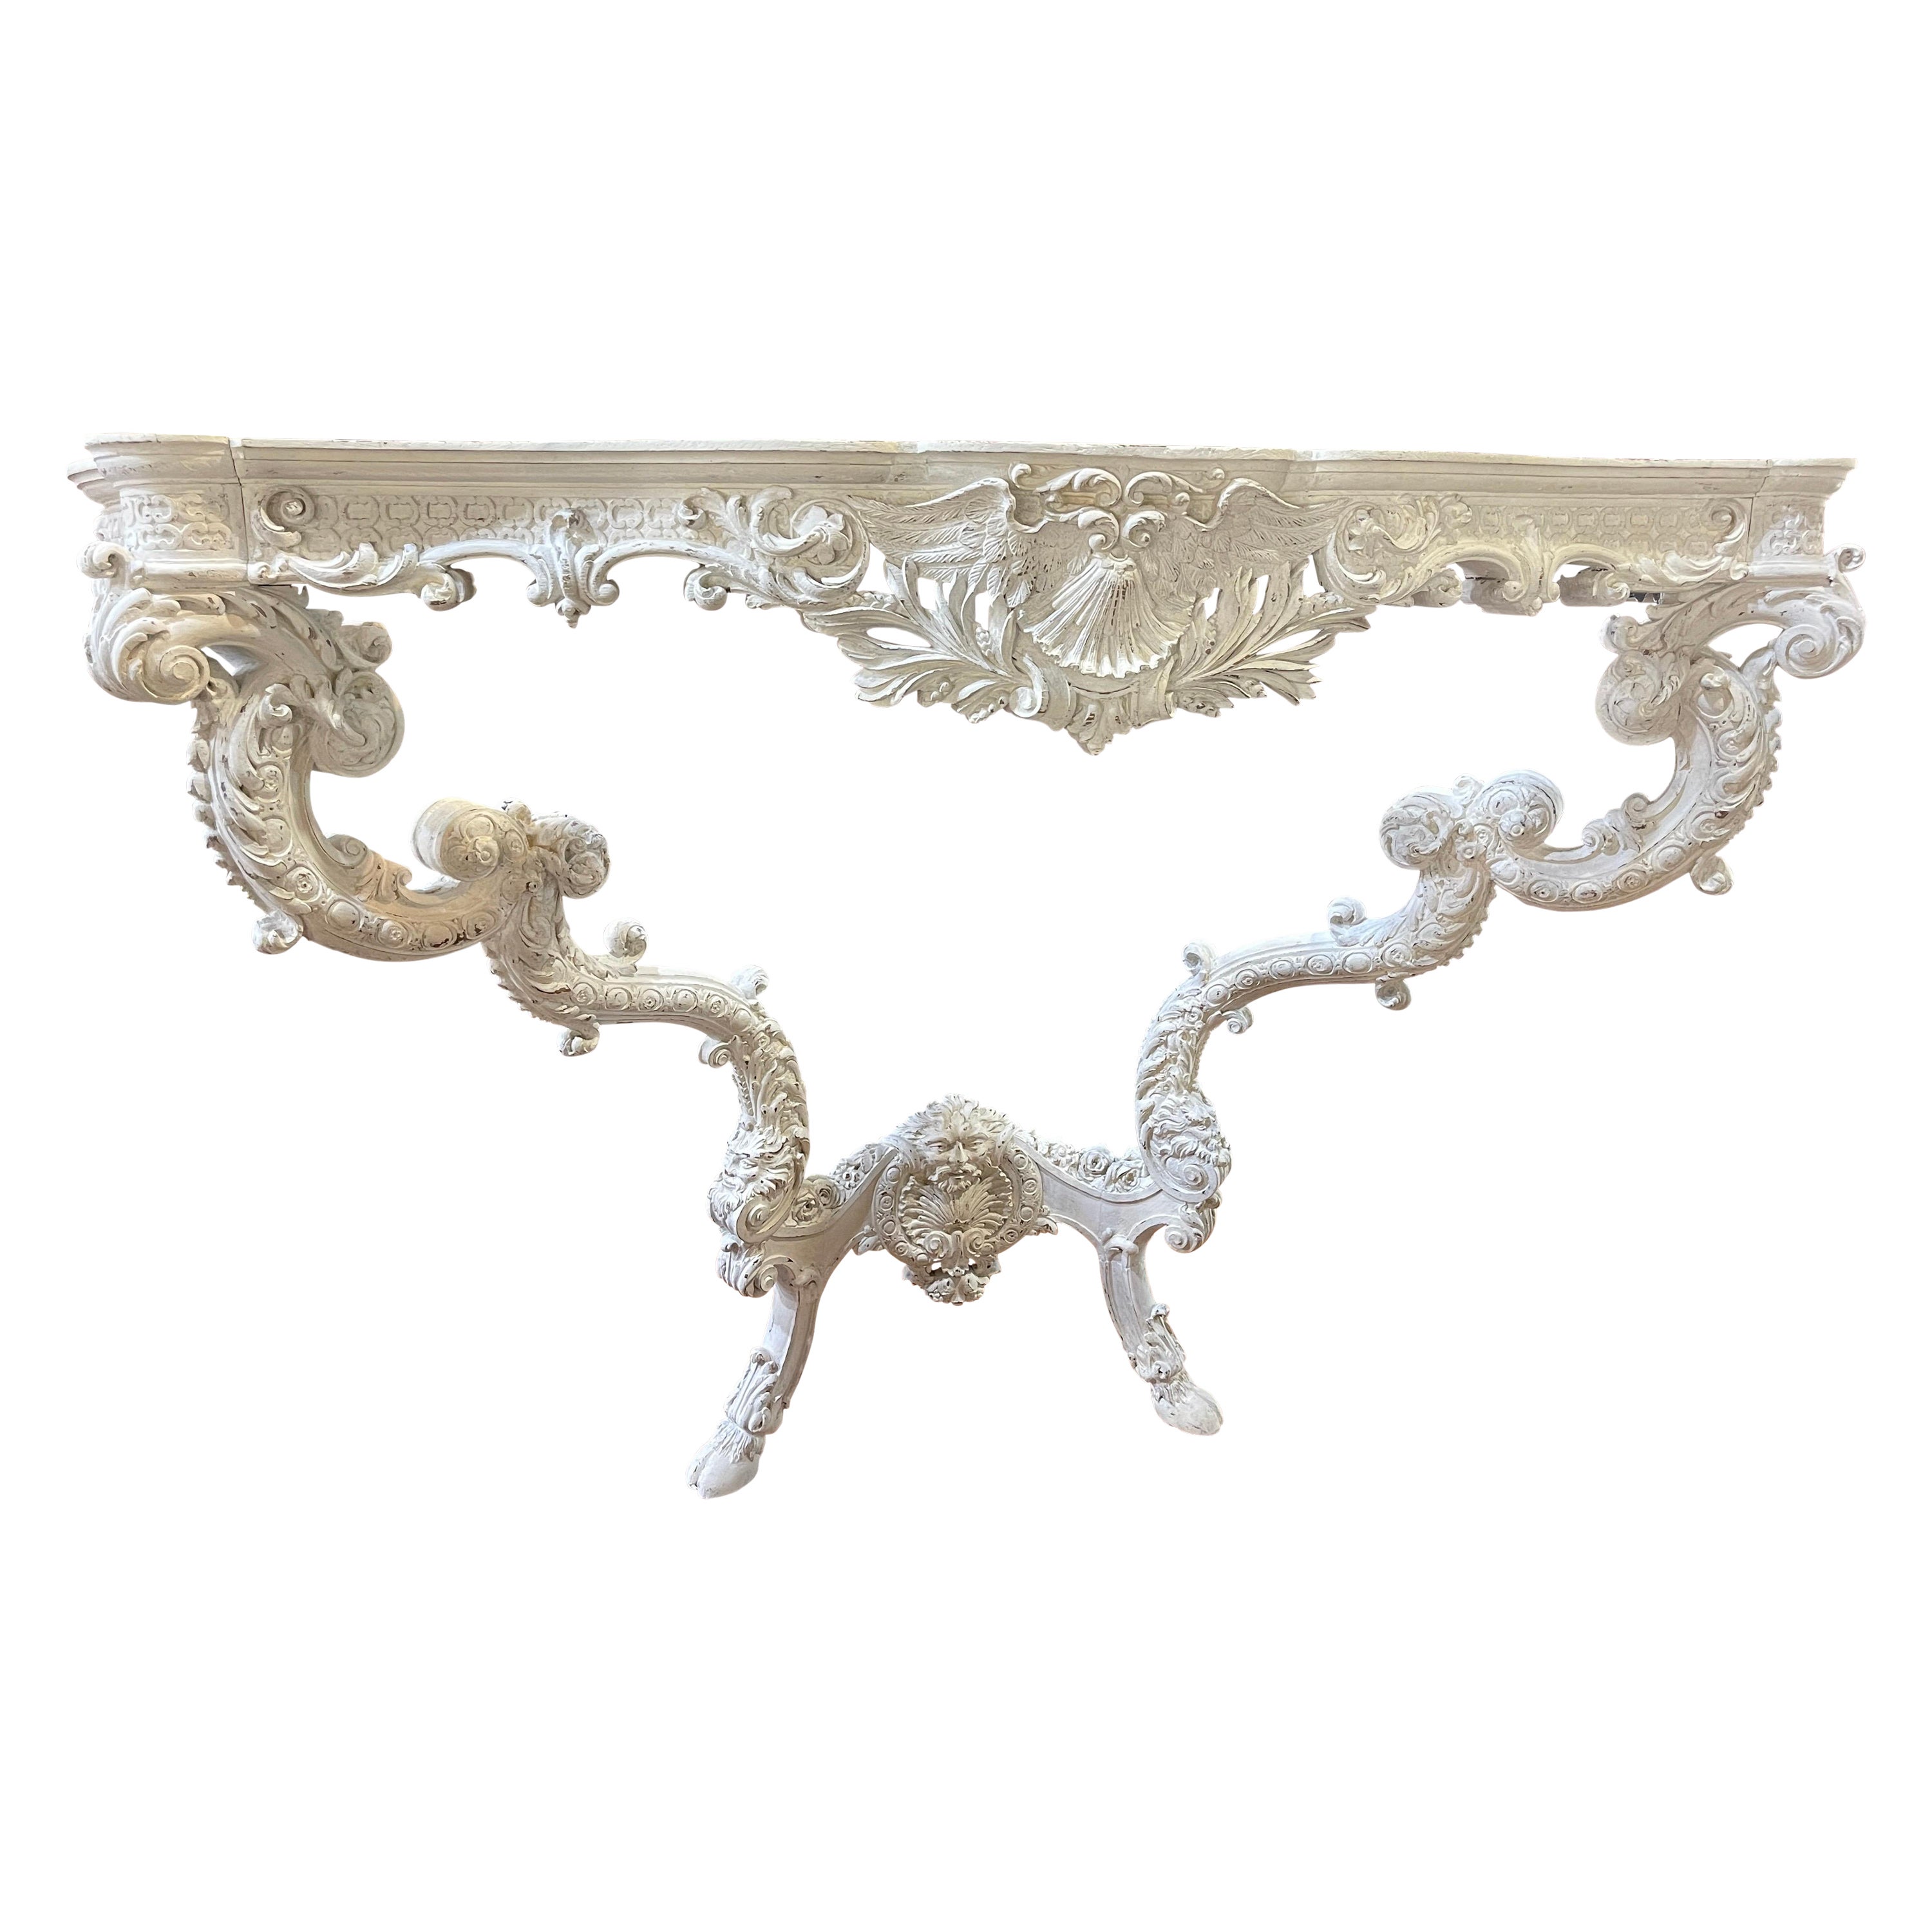 19th Century Italian Louis XV Revival Oak Lacquered Marble Console 1800 For Sale